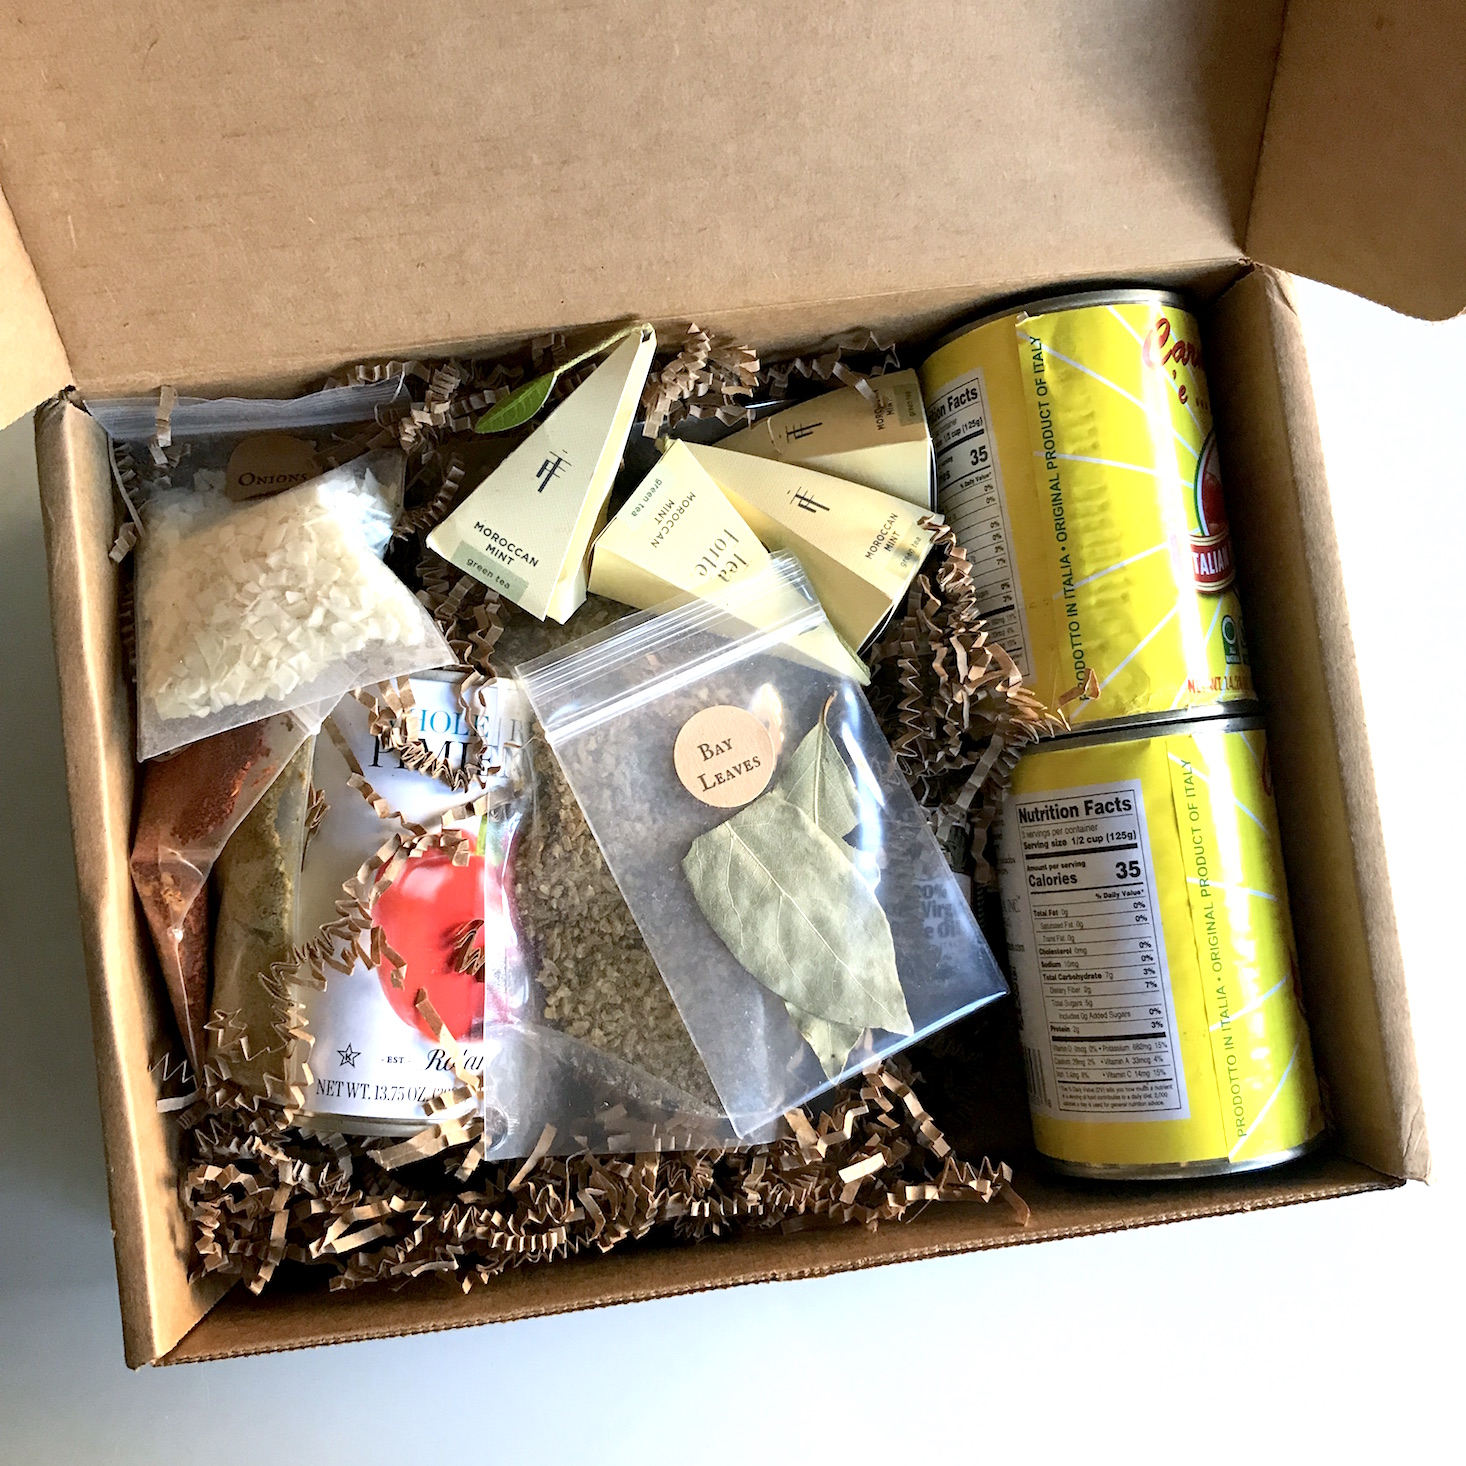 Takeout Kit Meal Subscription Box Review – October 2017